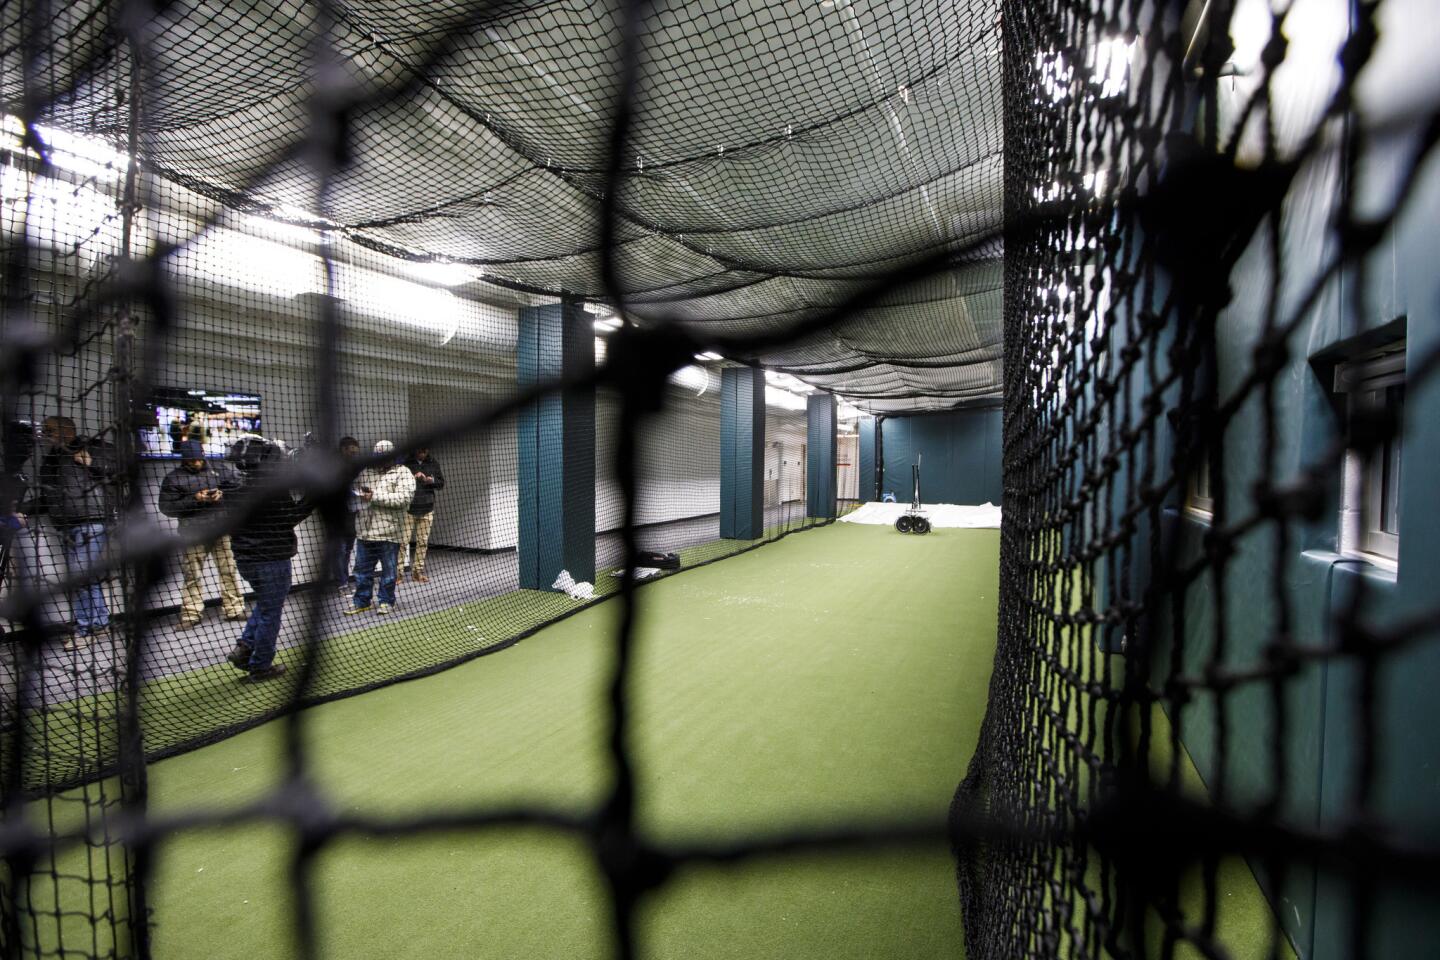 Expanded batting cage for visiting team